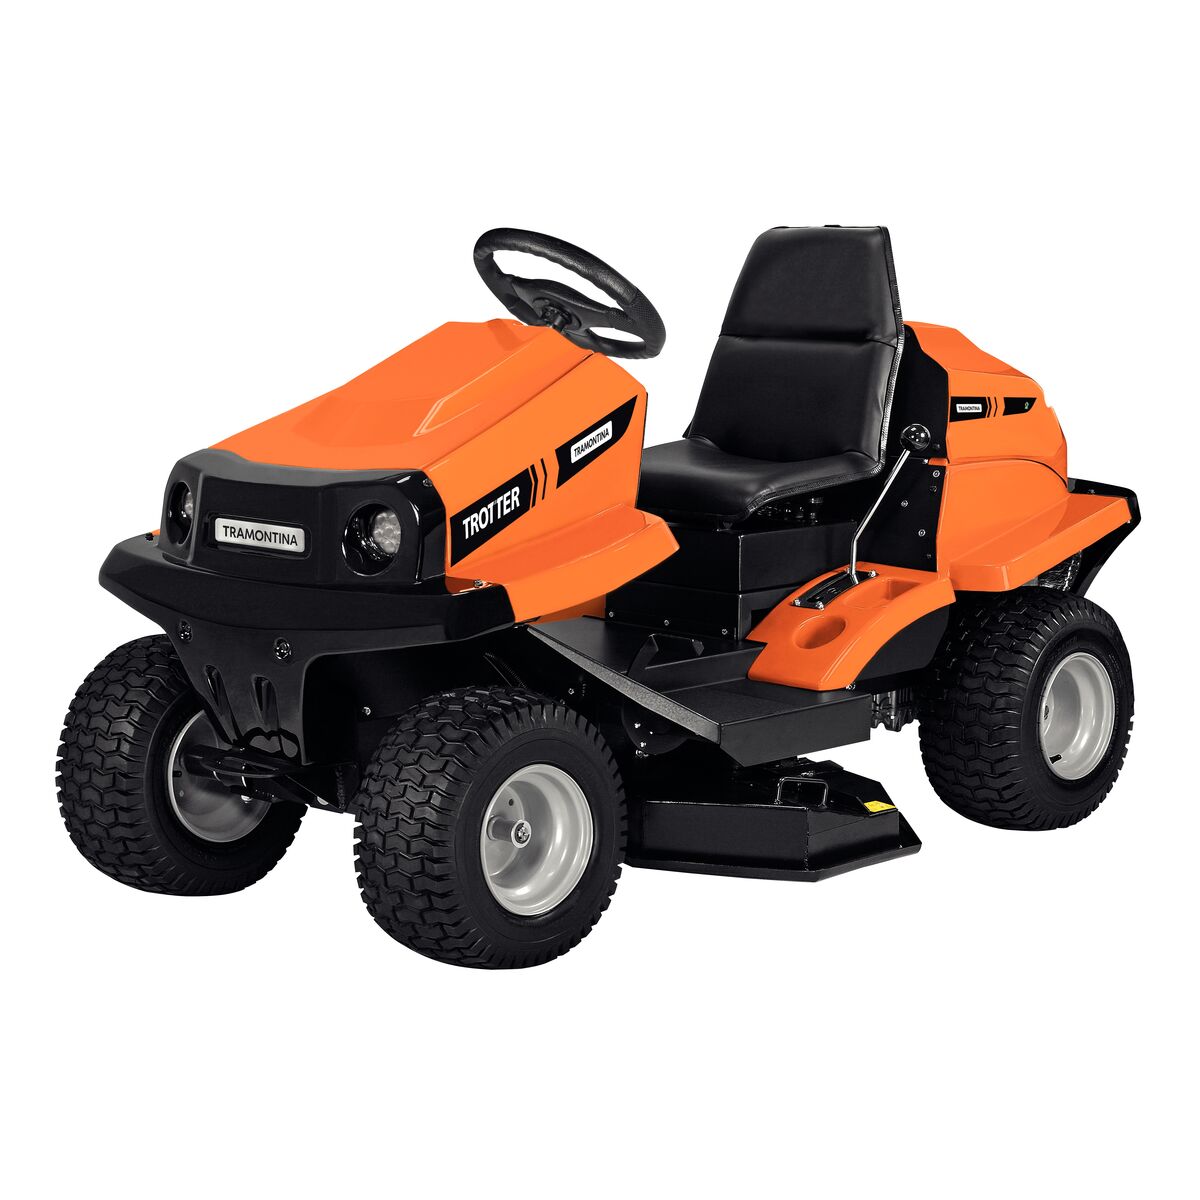 Tramontina Trotter Riding Lawn Mower